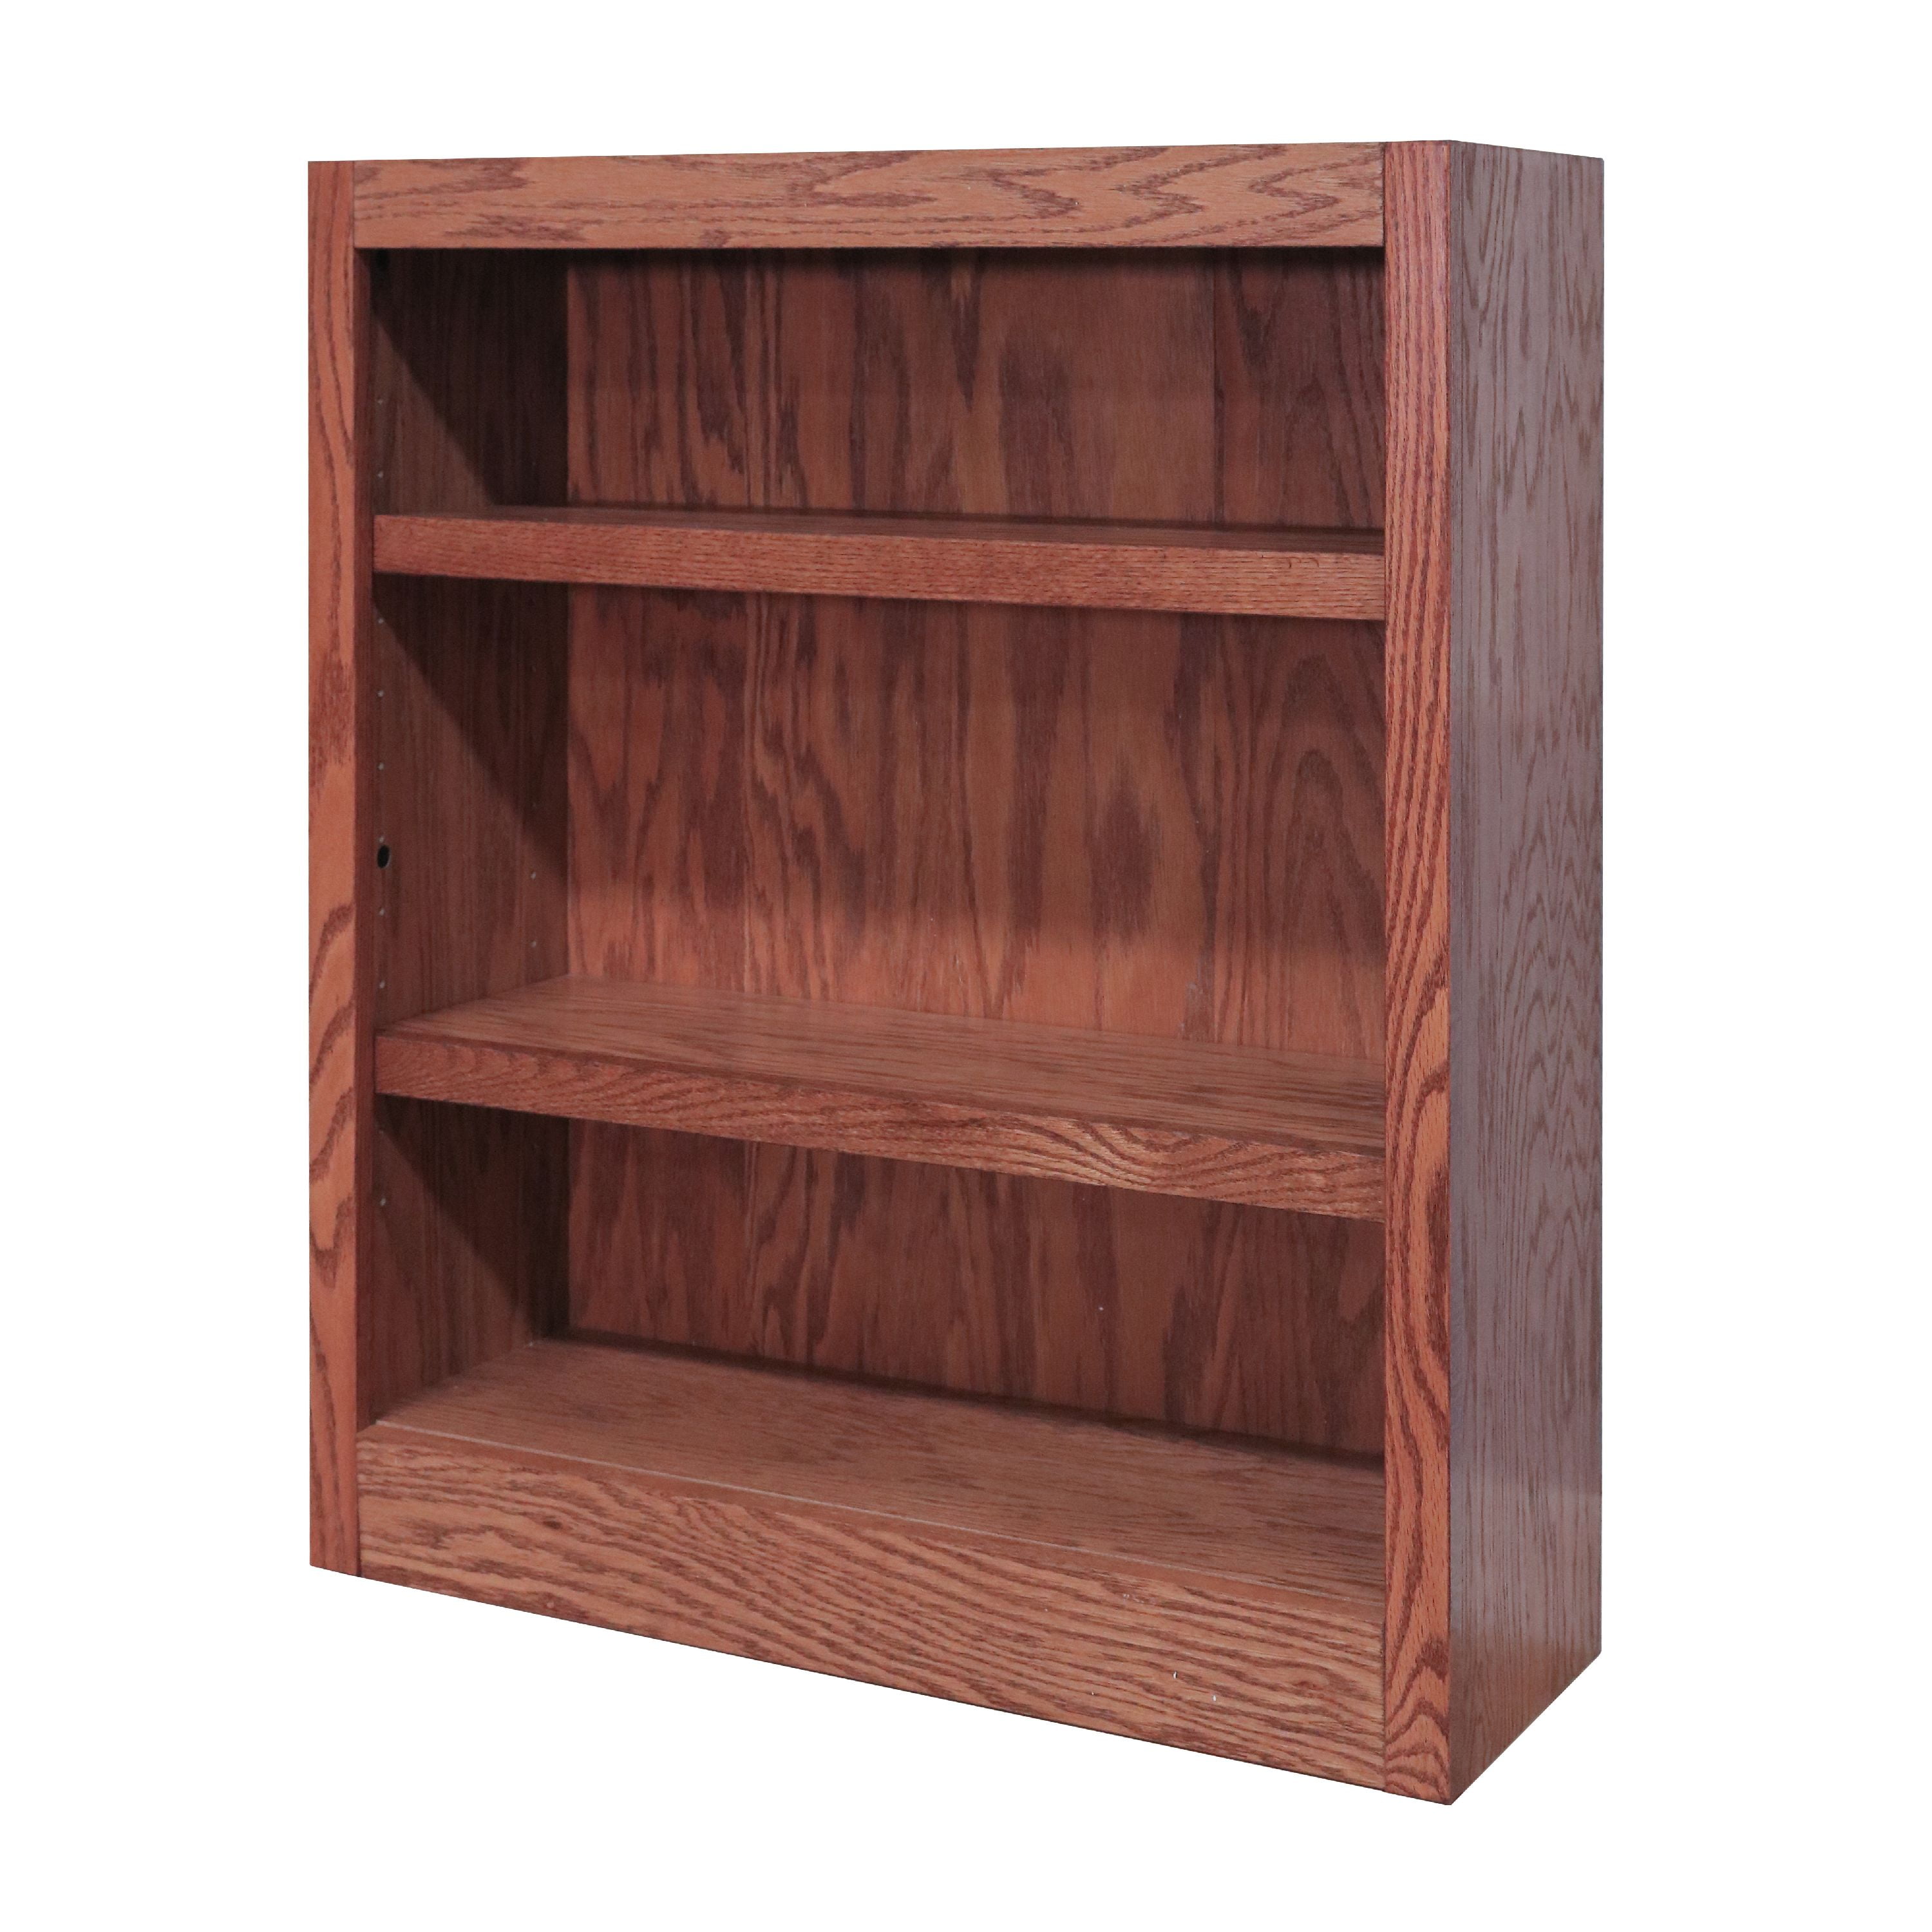 Concepts In Wood 3 Shelf Bookcase, 108 Inch Tall Bookcase